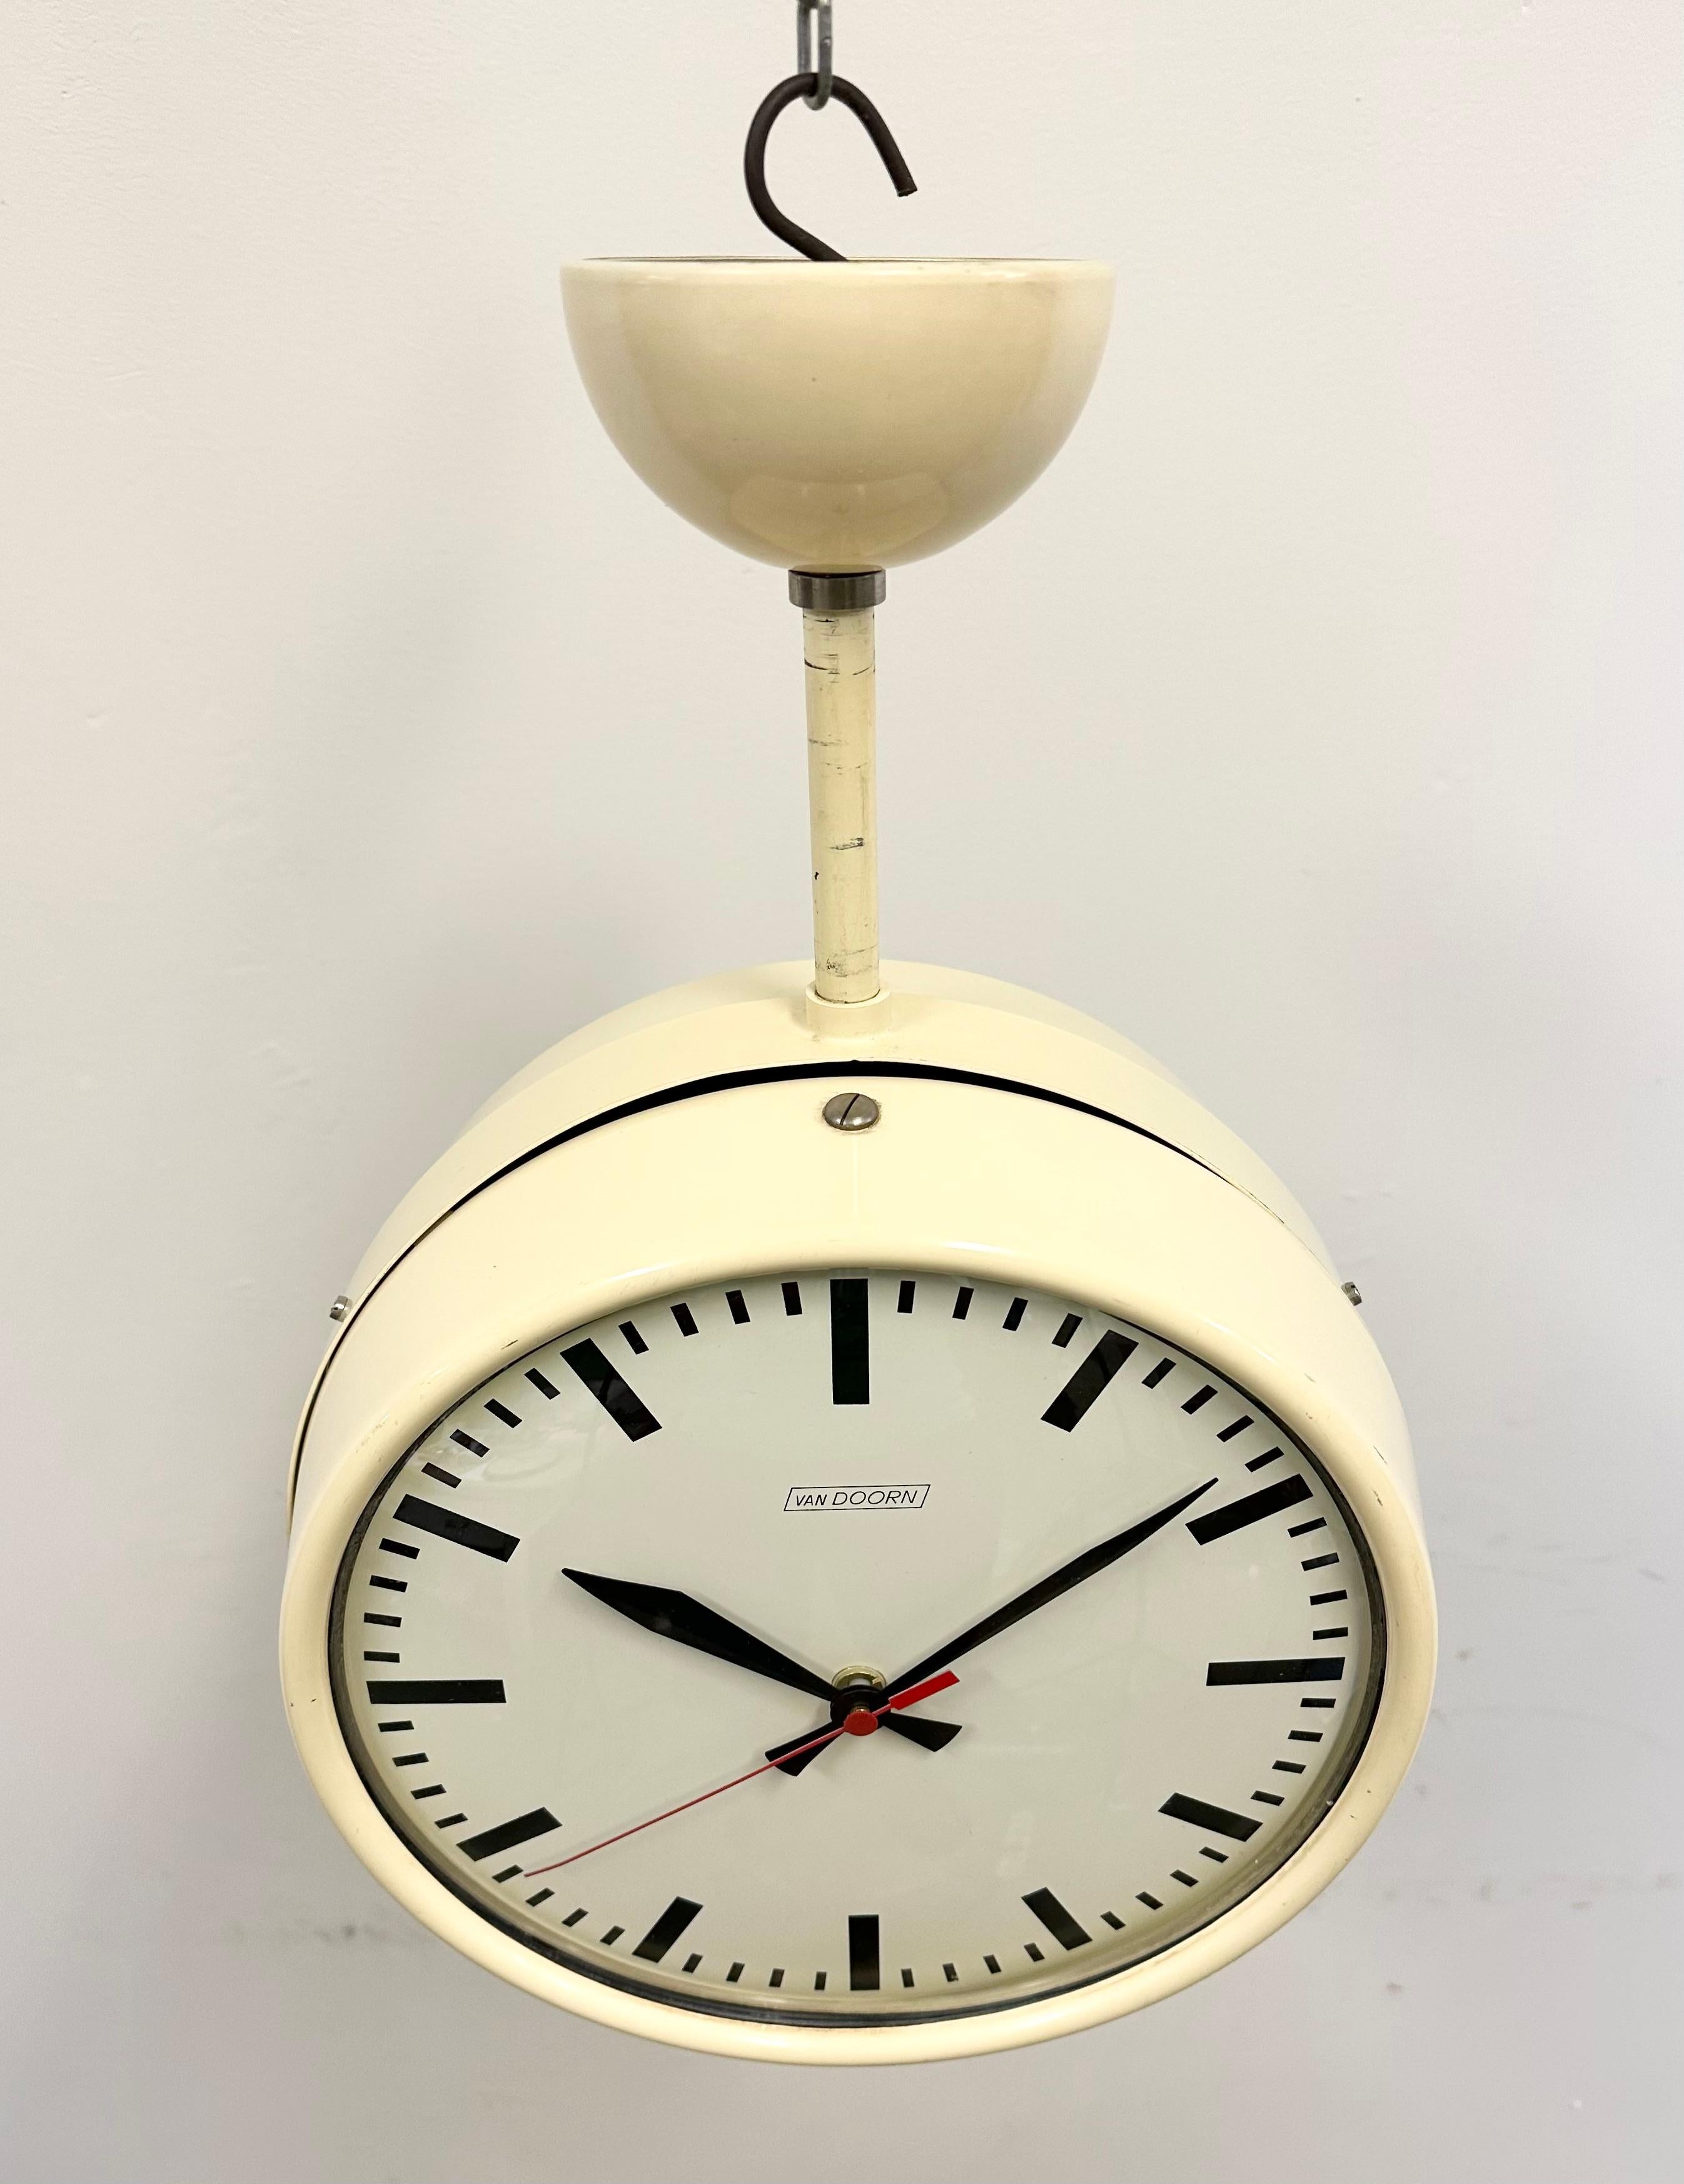 Vintage Beige Double Sided School or Station Ceiling Clock from Van Doorn, 1960s In Good Condition For Sale In Kojetice, CZ